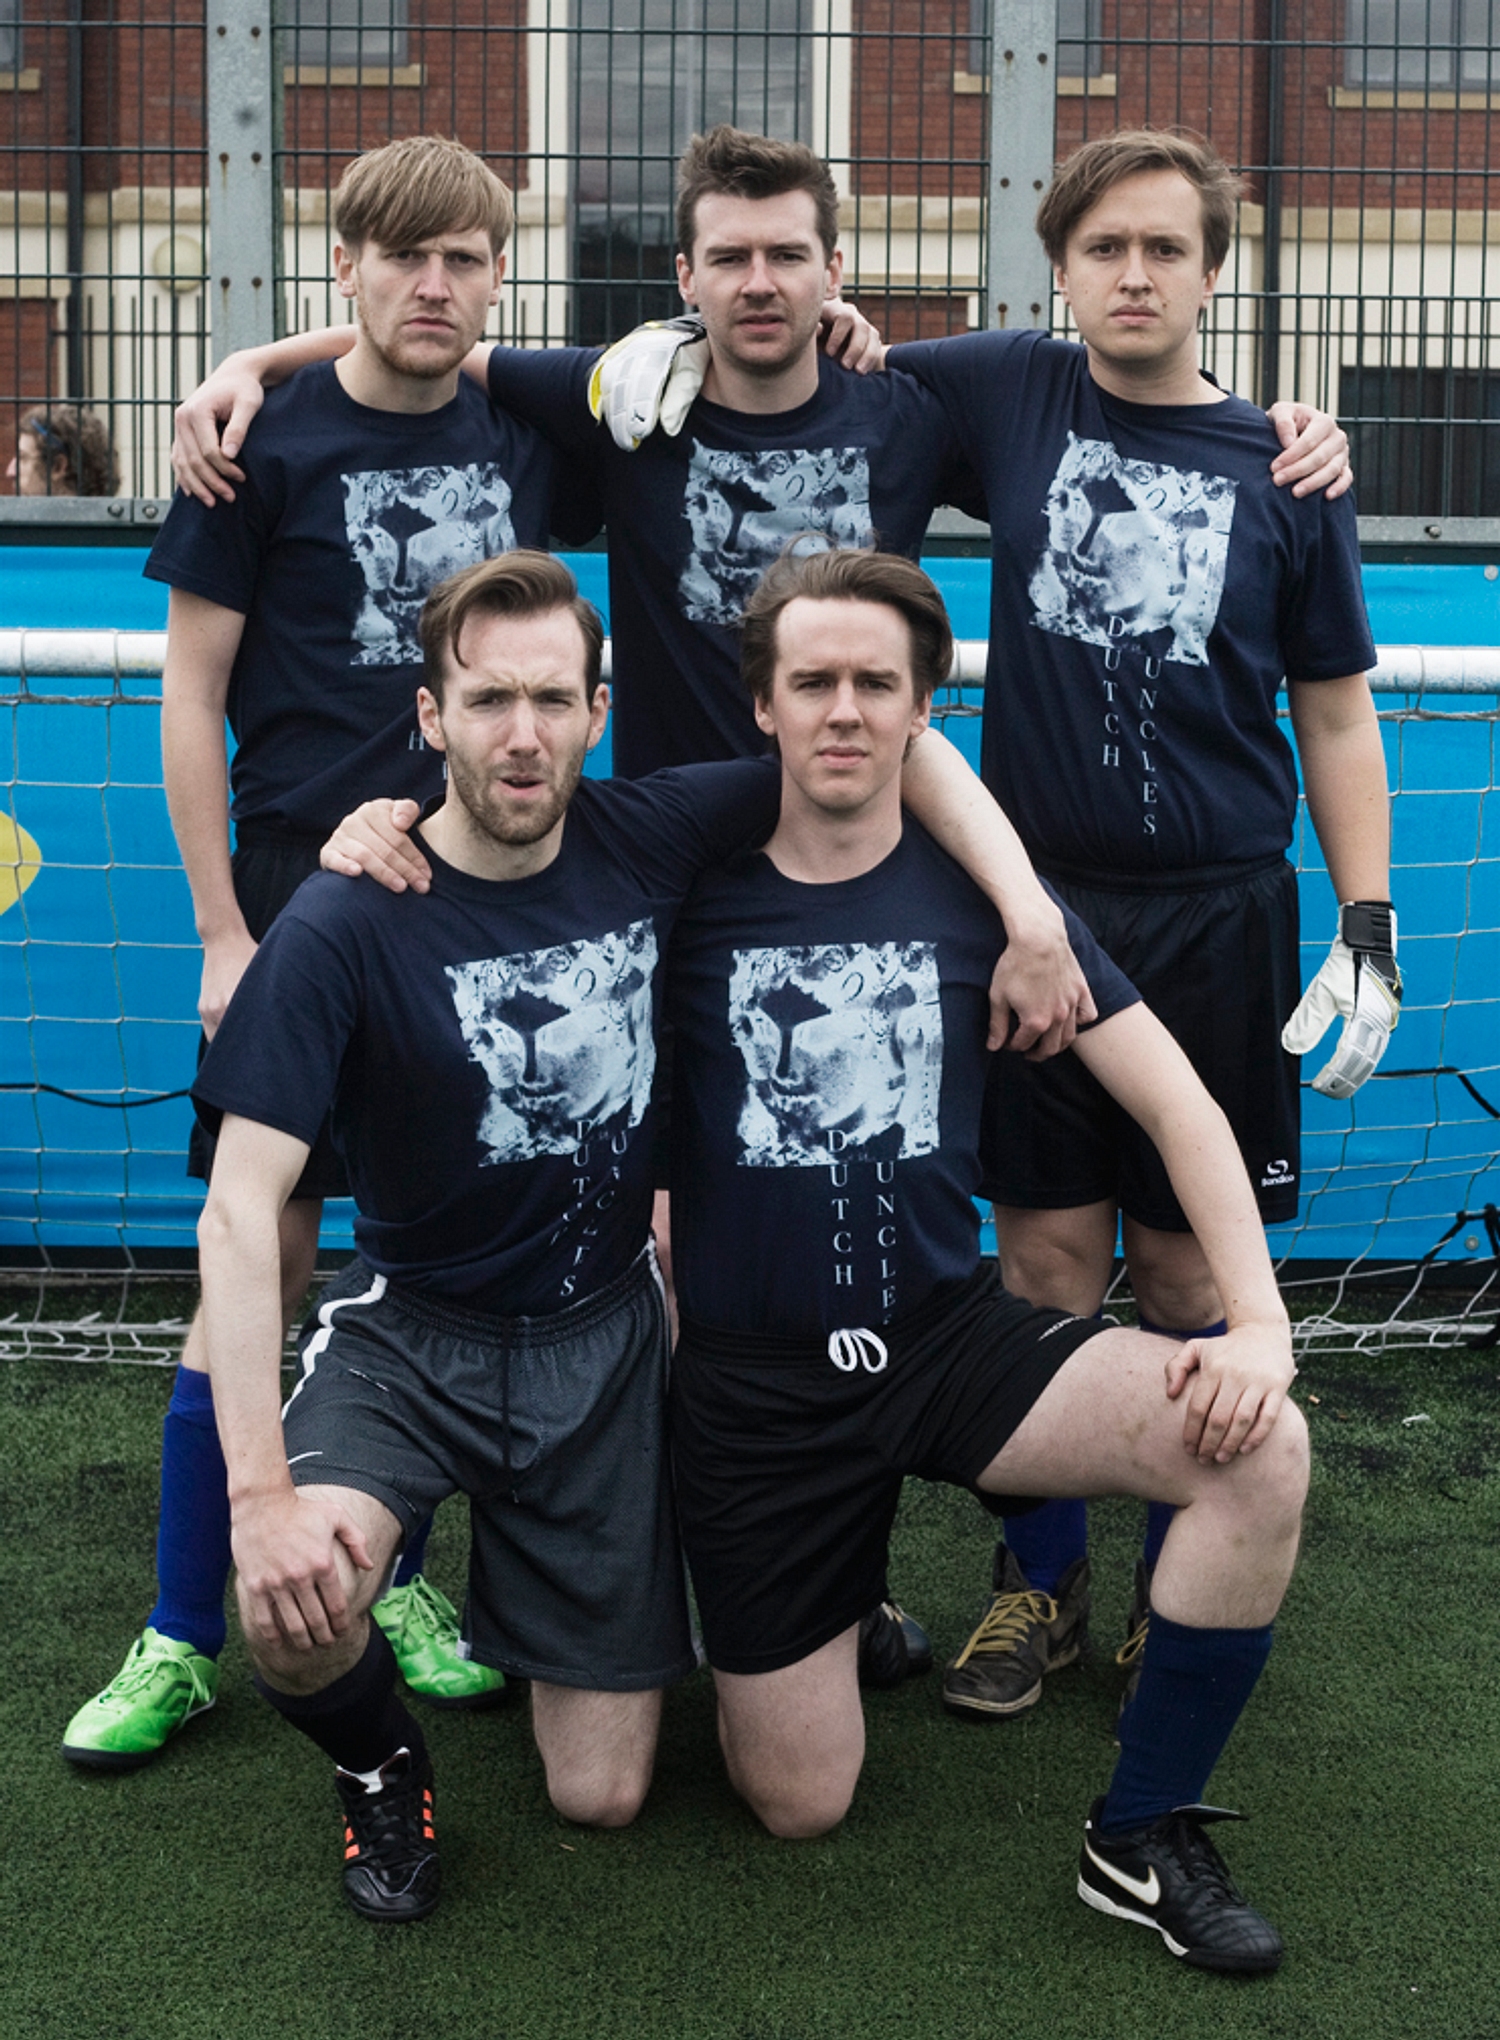 Eat my goal: Swim Deep, Gengahr and more give their hopes for the 2015/16 football season